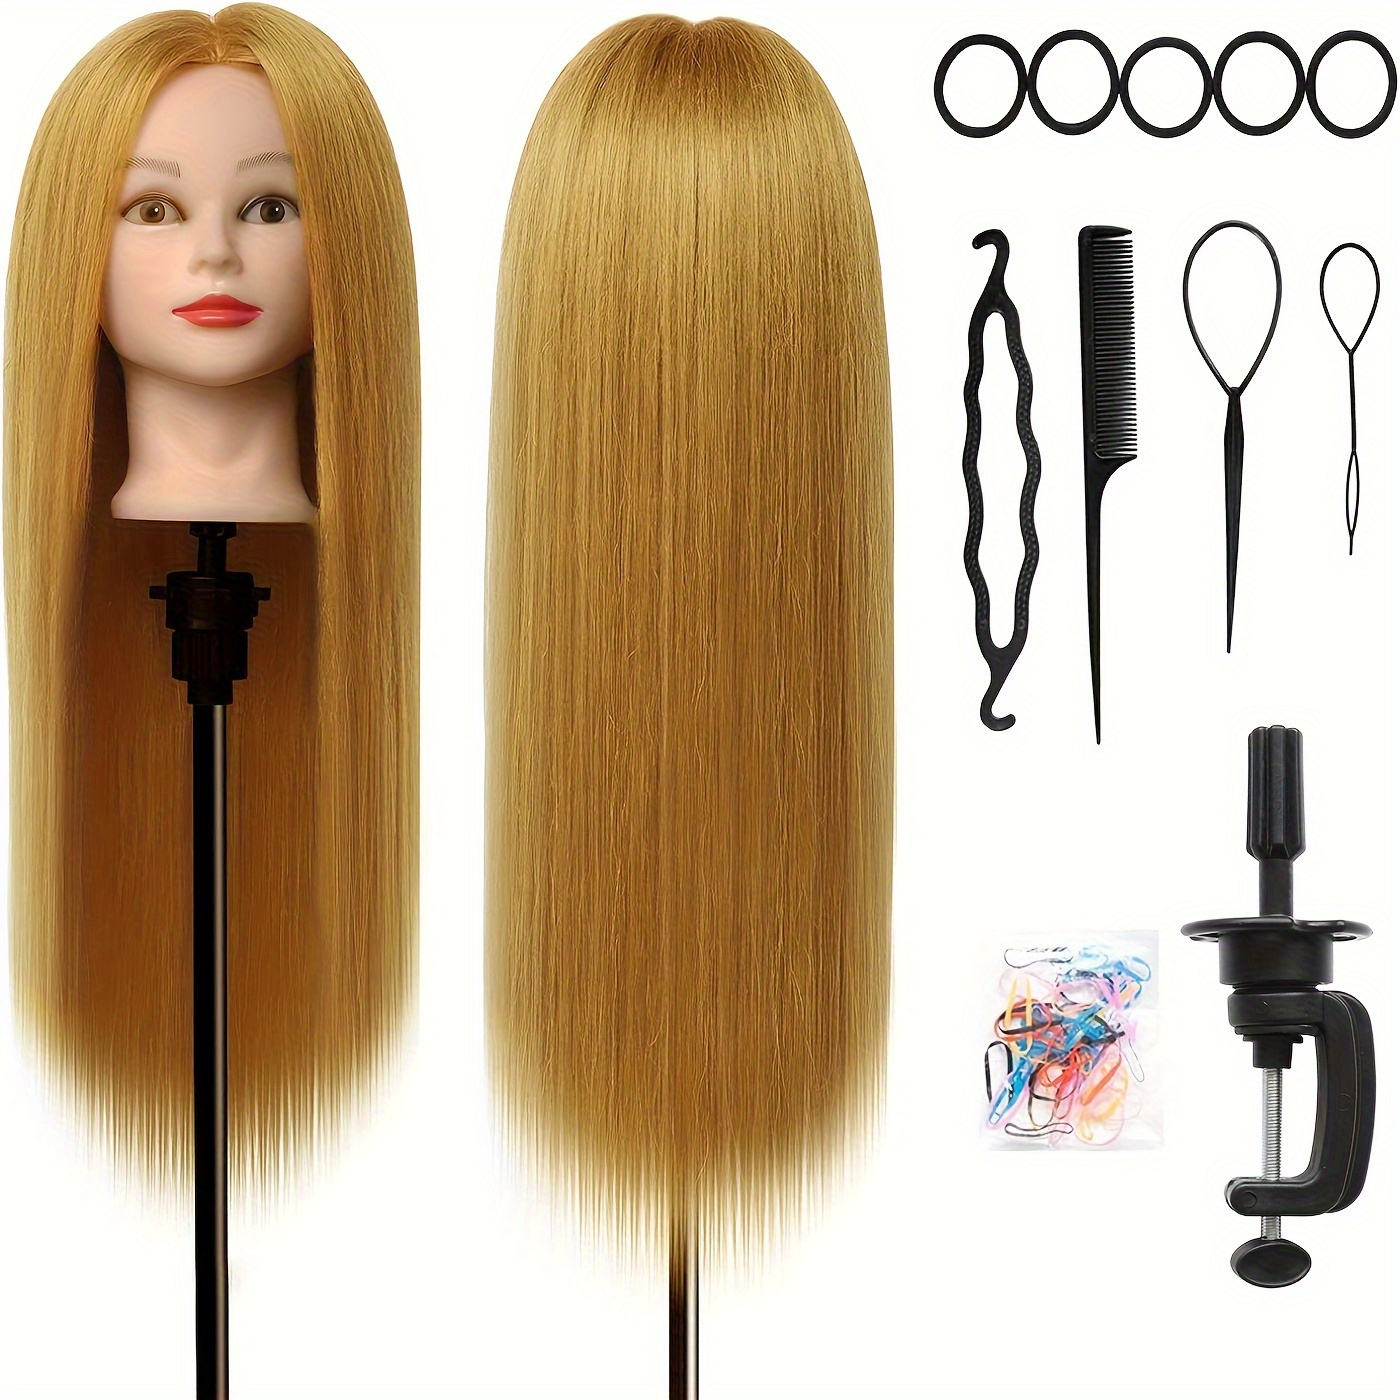 Mannequin Head with 80% Real Hair, TopDirect 24 Blonde Hair Styling Hairdressing Cosmetology Mannequin Manikin Training Practice Head with Clamp